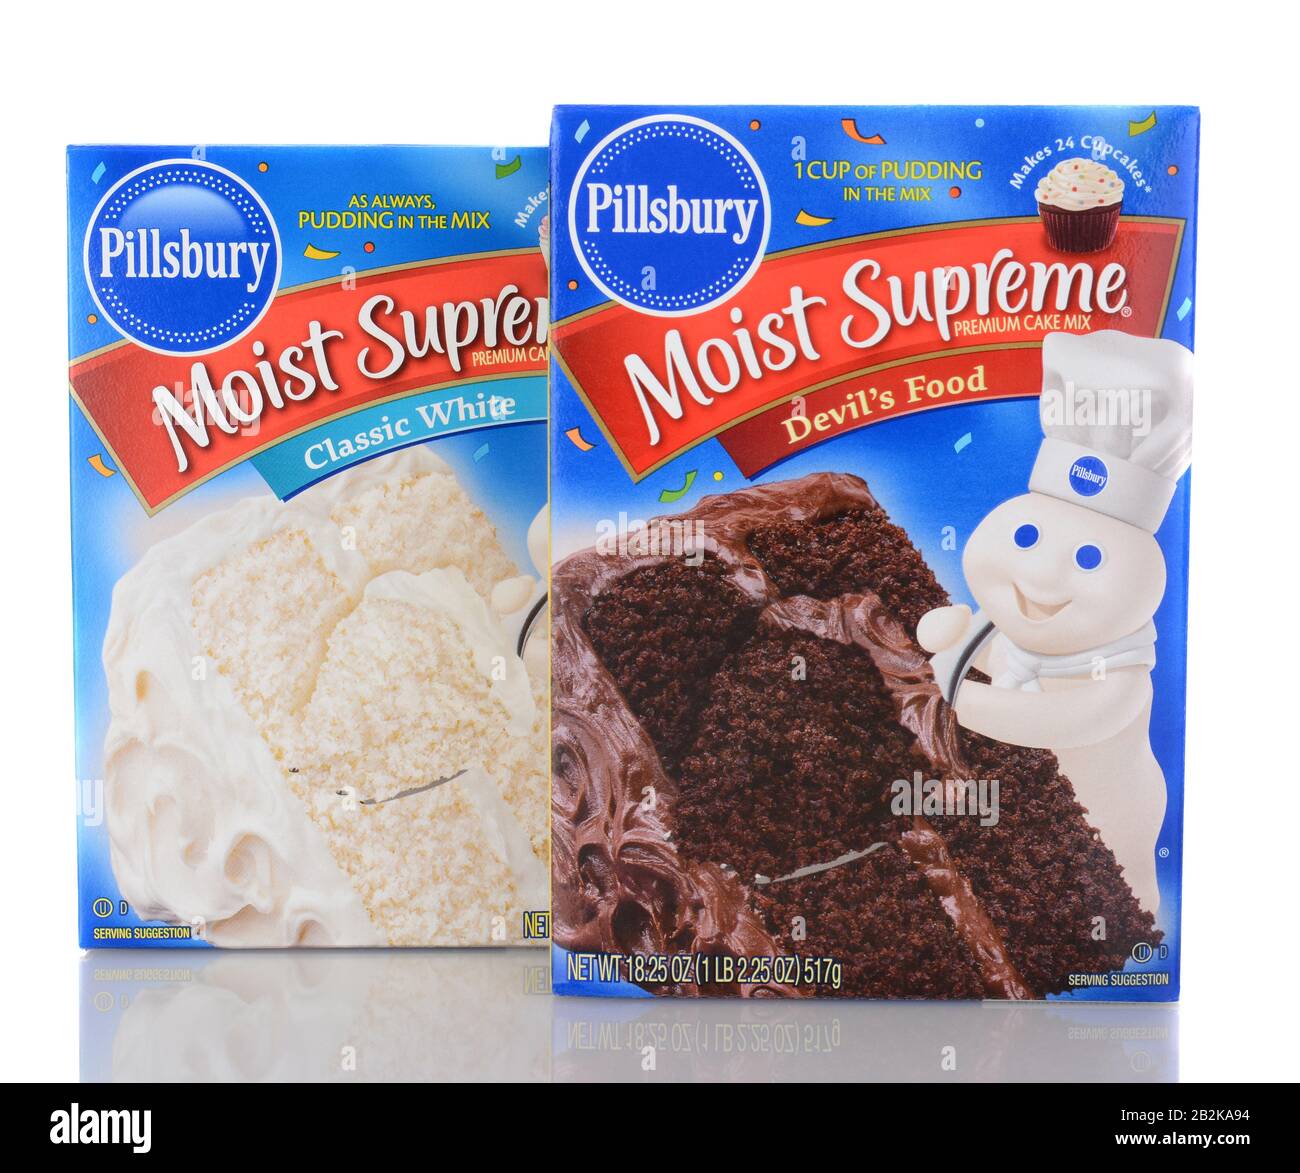 IRVINE, CA - January 05, 2014: Two Boxes of Pillsbury Moist Supreme Cake Mix. One box of White Cake Mix and a box of Devils Food. Stock Photo